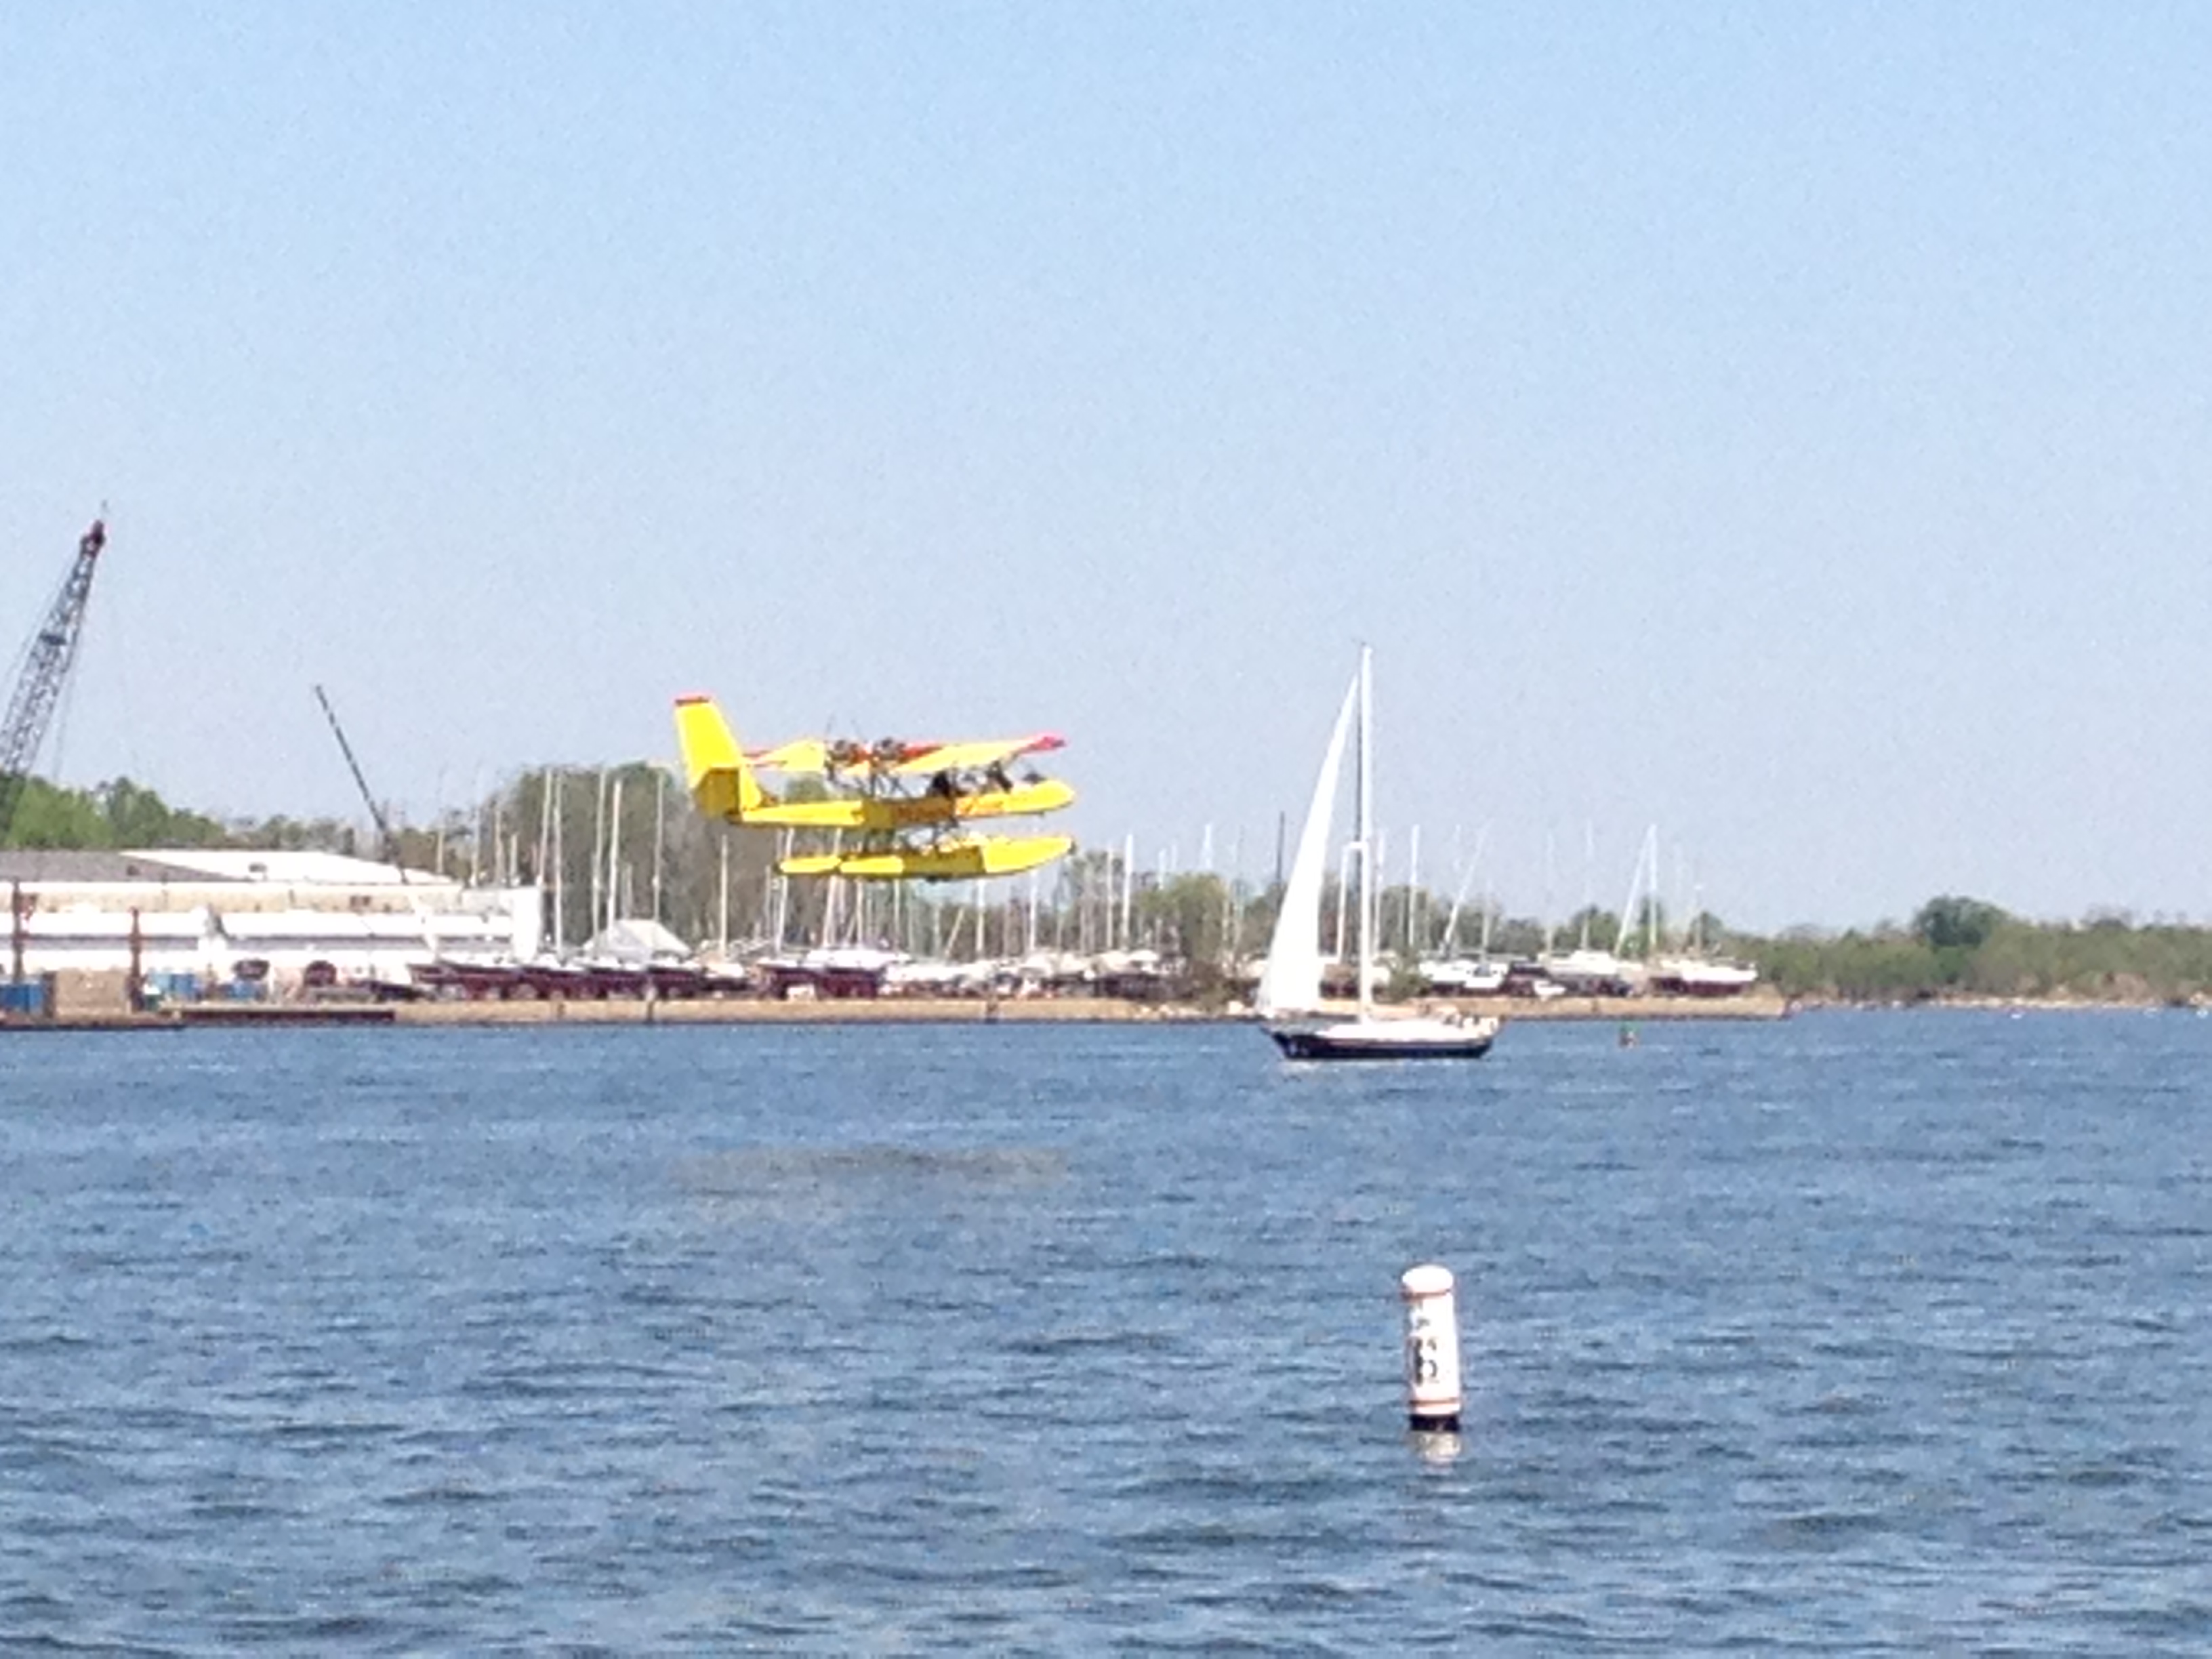 Seaplane taking off on the Severn River